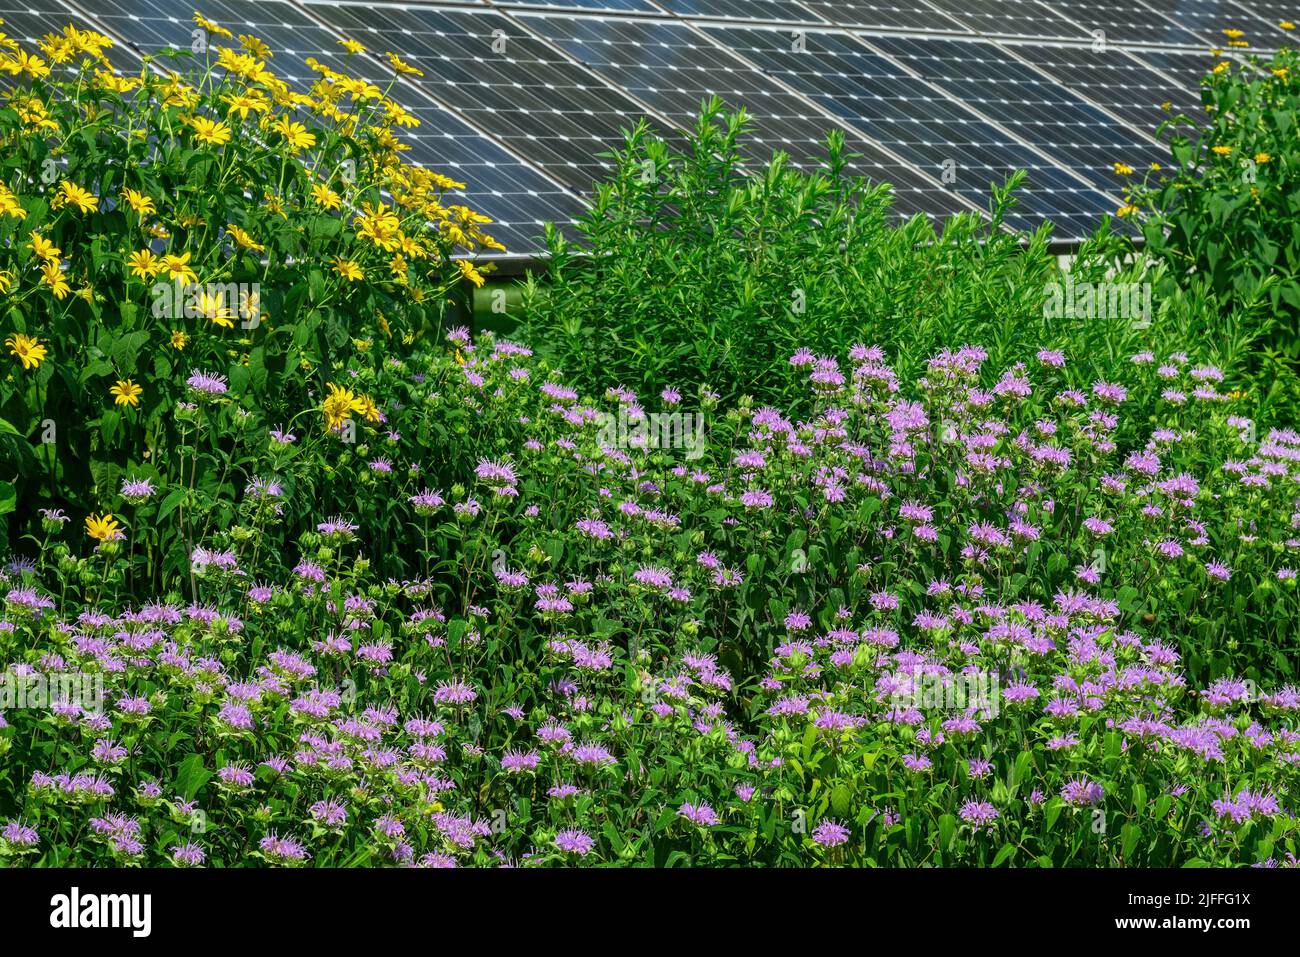 Bee balm and perennial sunflowers with solar panels in the background illustrating sustainability by coexisting in a pollinator garden. Stock Photo